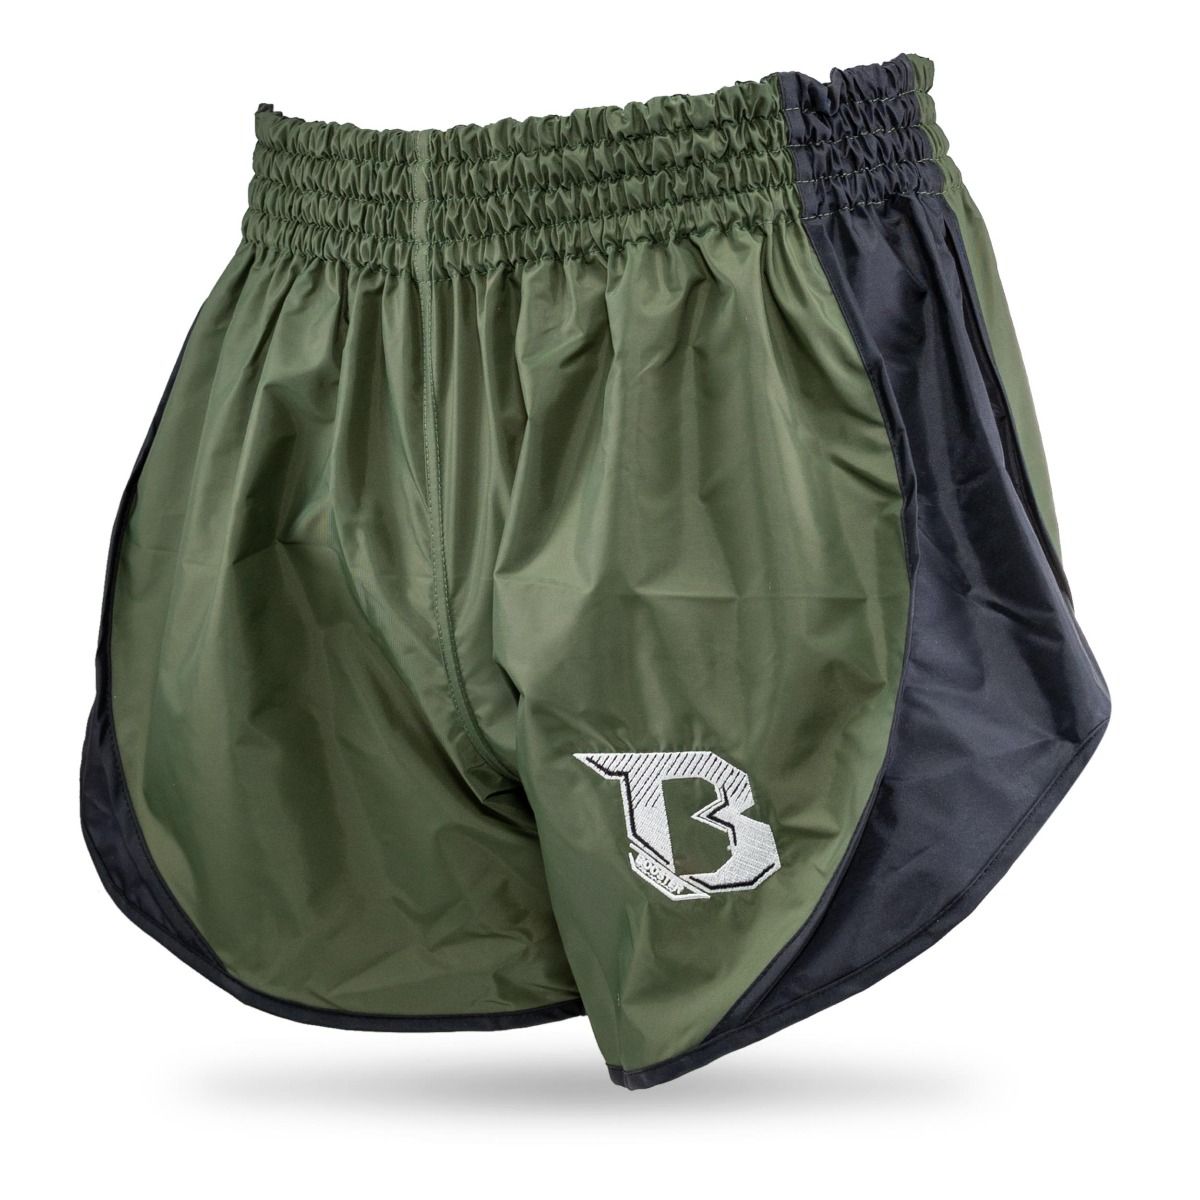 RETRO HYBRID GREEN  These all round trunks are handmade in Thailand . The shape allows great movement for the legs & they are